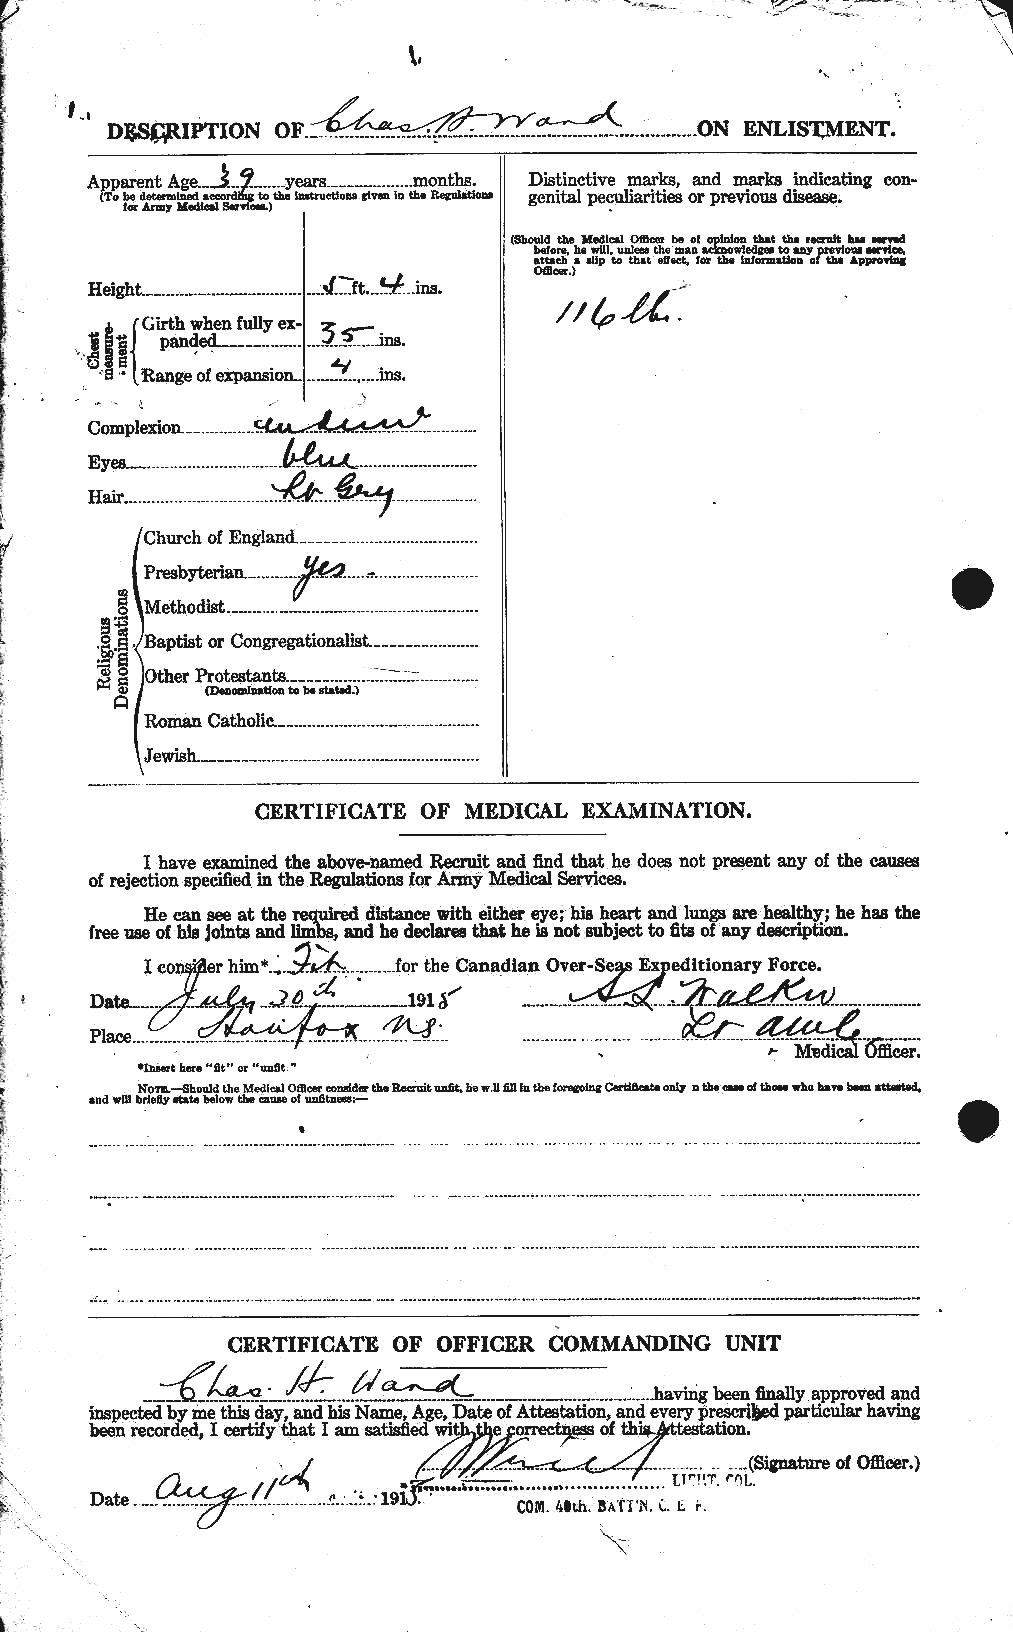 Personnel Records of the First World War - CEF 657582b